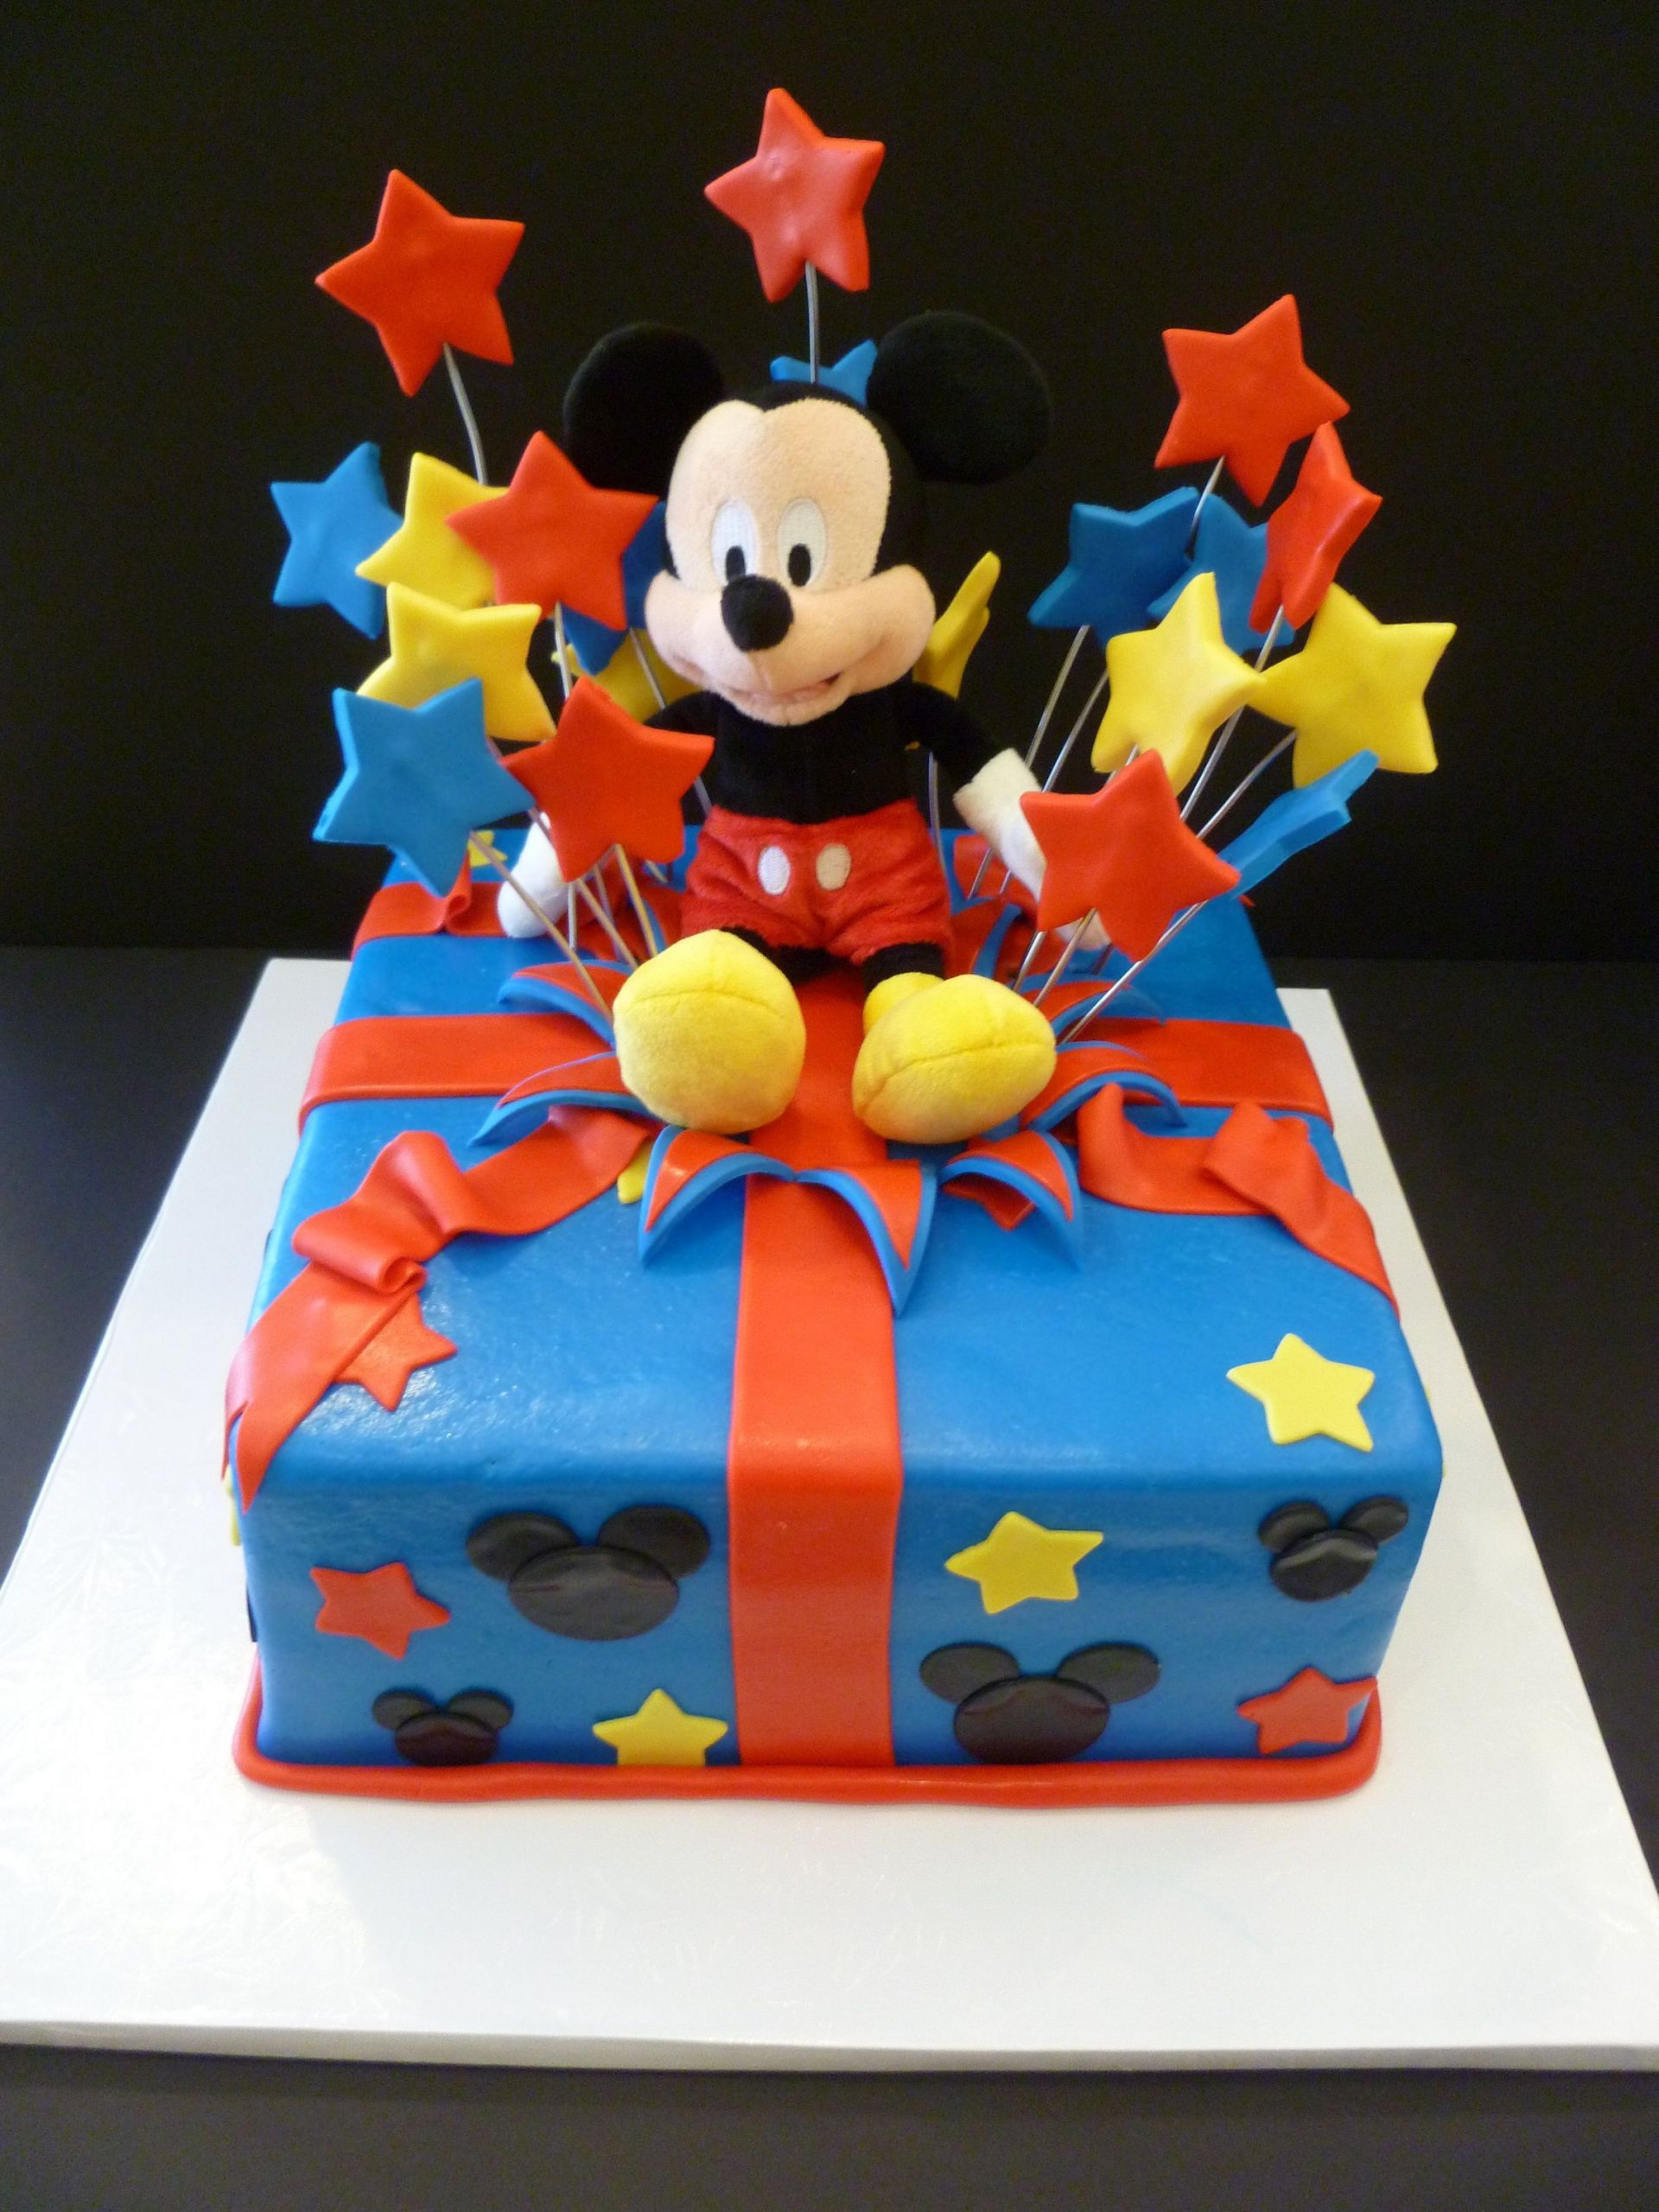 Mickey Mouse Birthday Cake Decorations
 Mickey Mouse Cake Ideas & Inspirations